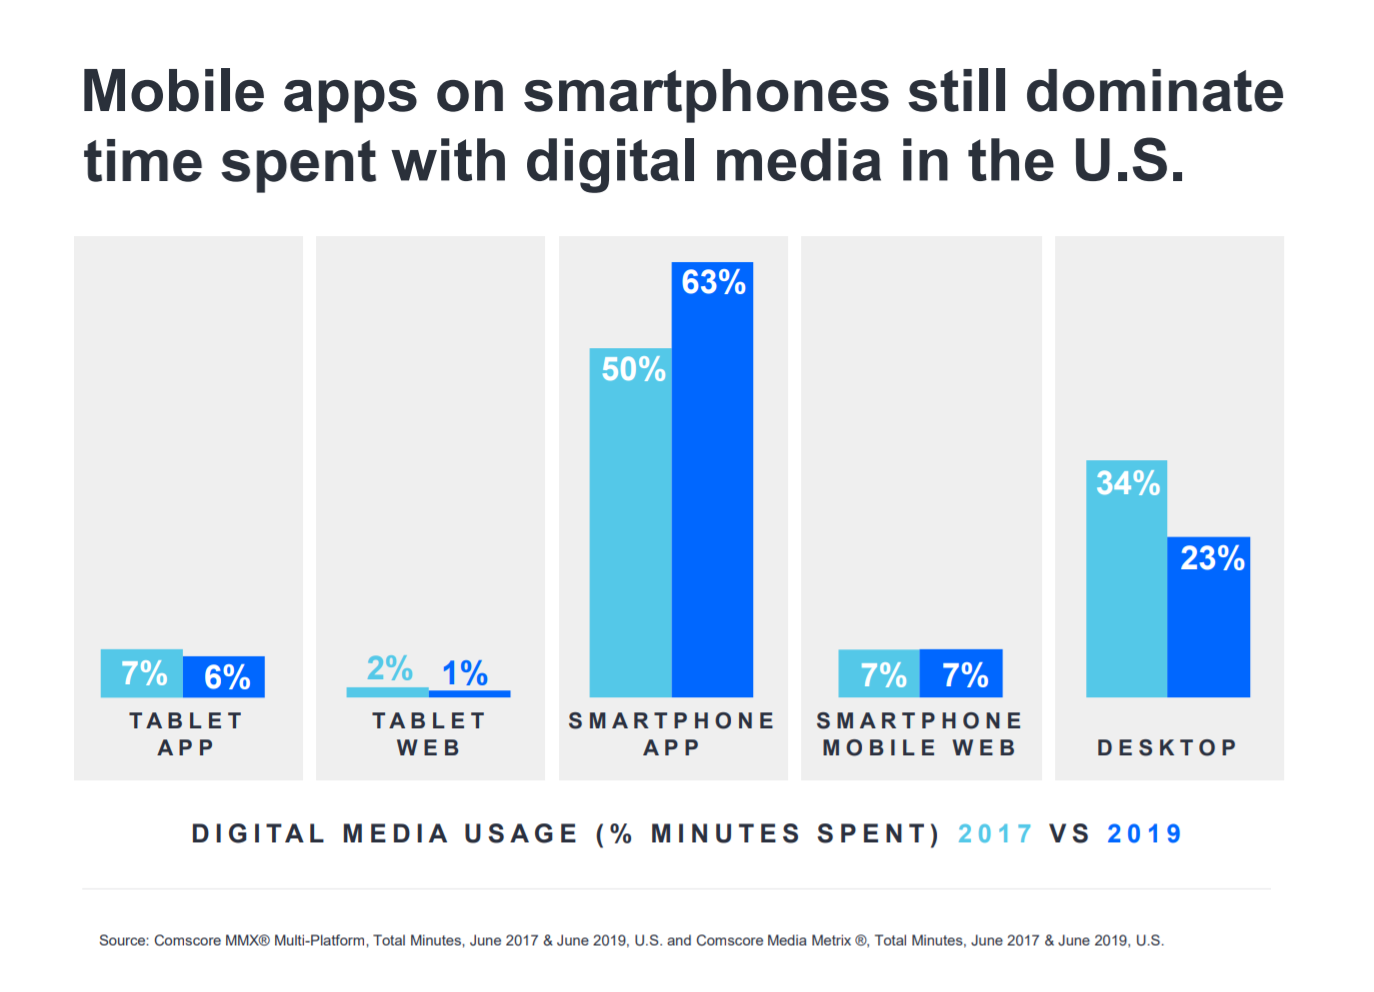 Mobile apps on smartphones still dominate time spent with digital media in the U.S. - chart